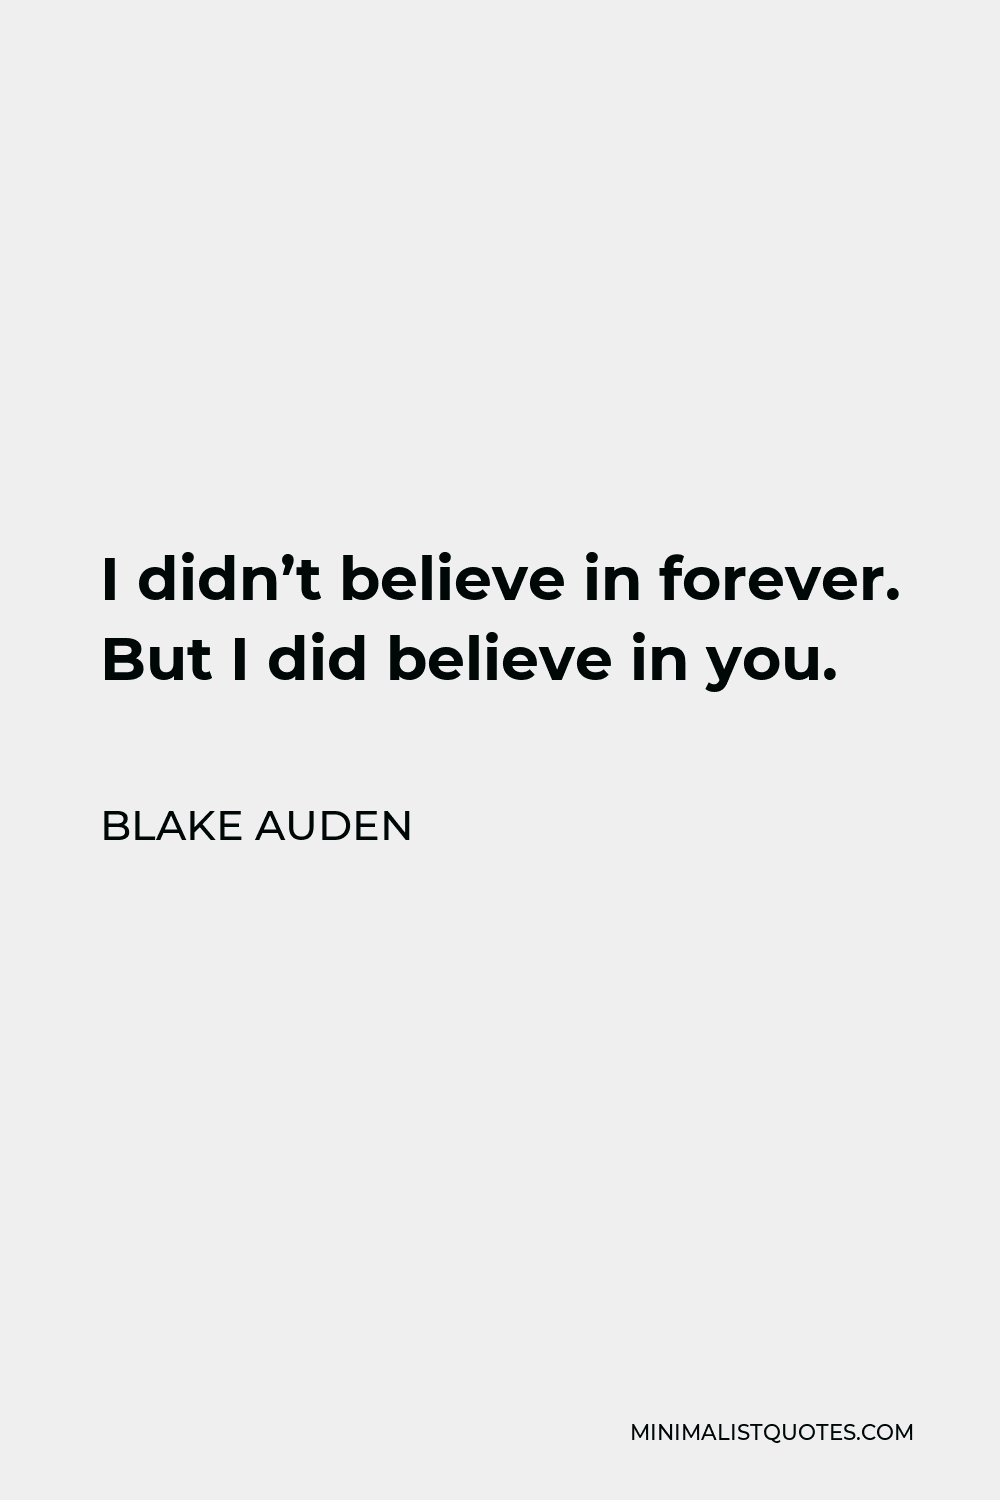 Blake Auden Quote - I didn’t believe in forever. But I did believe in you.